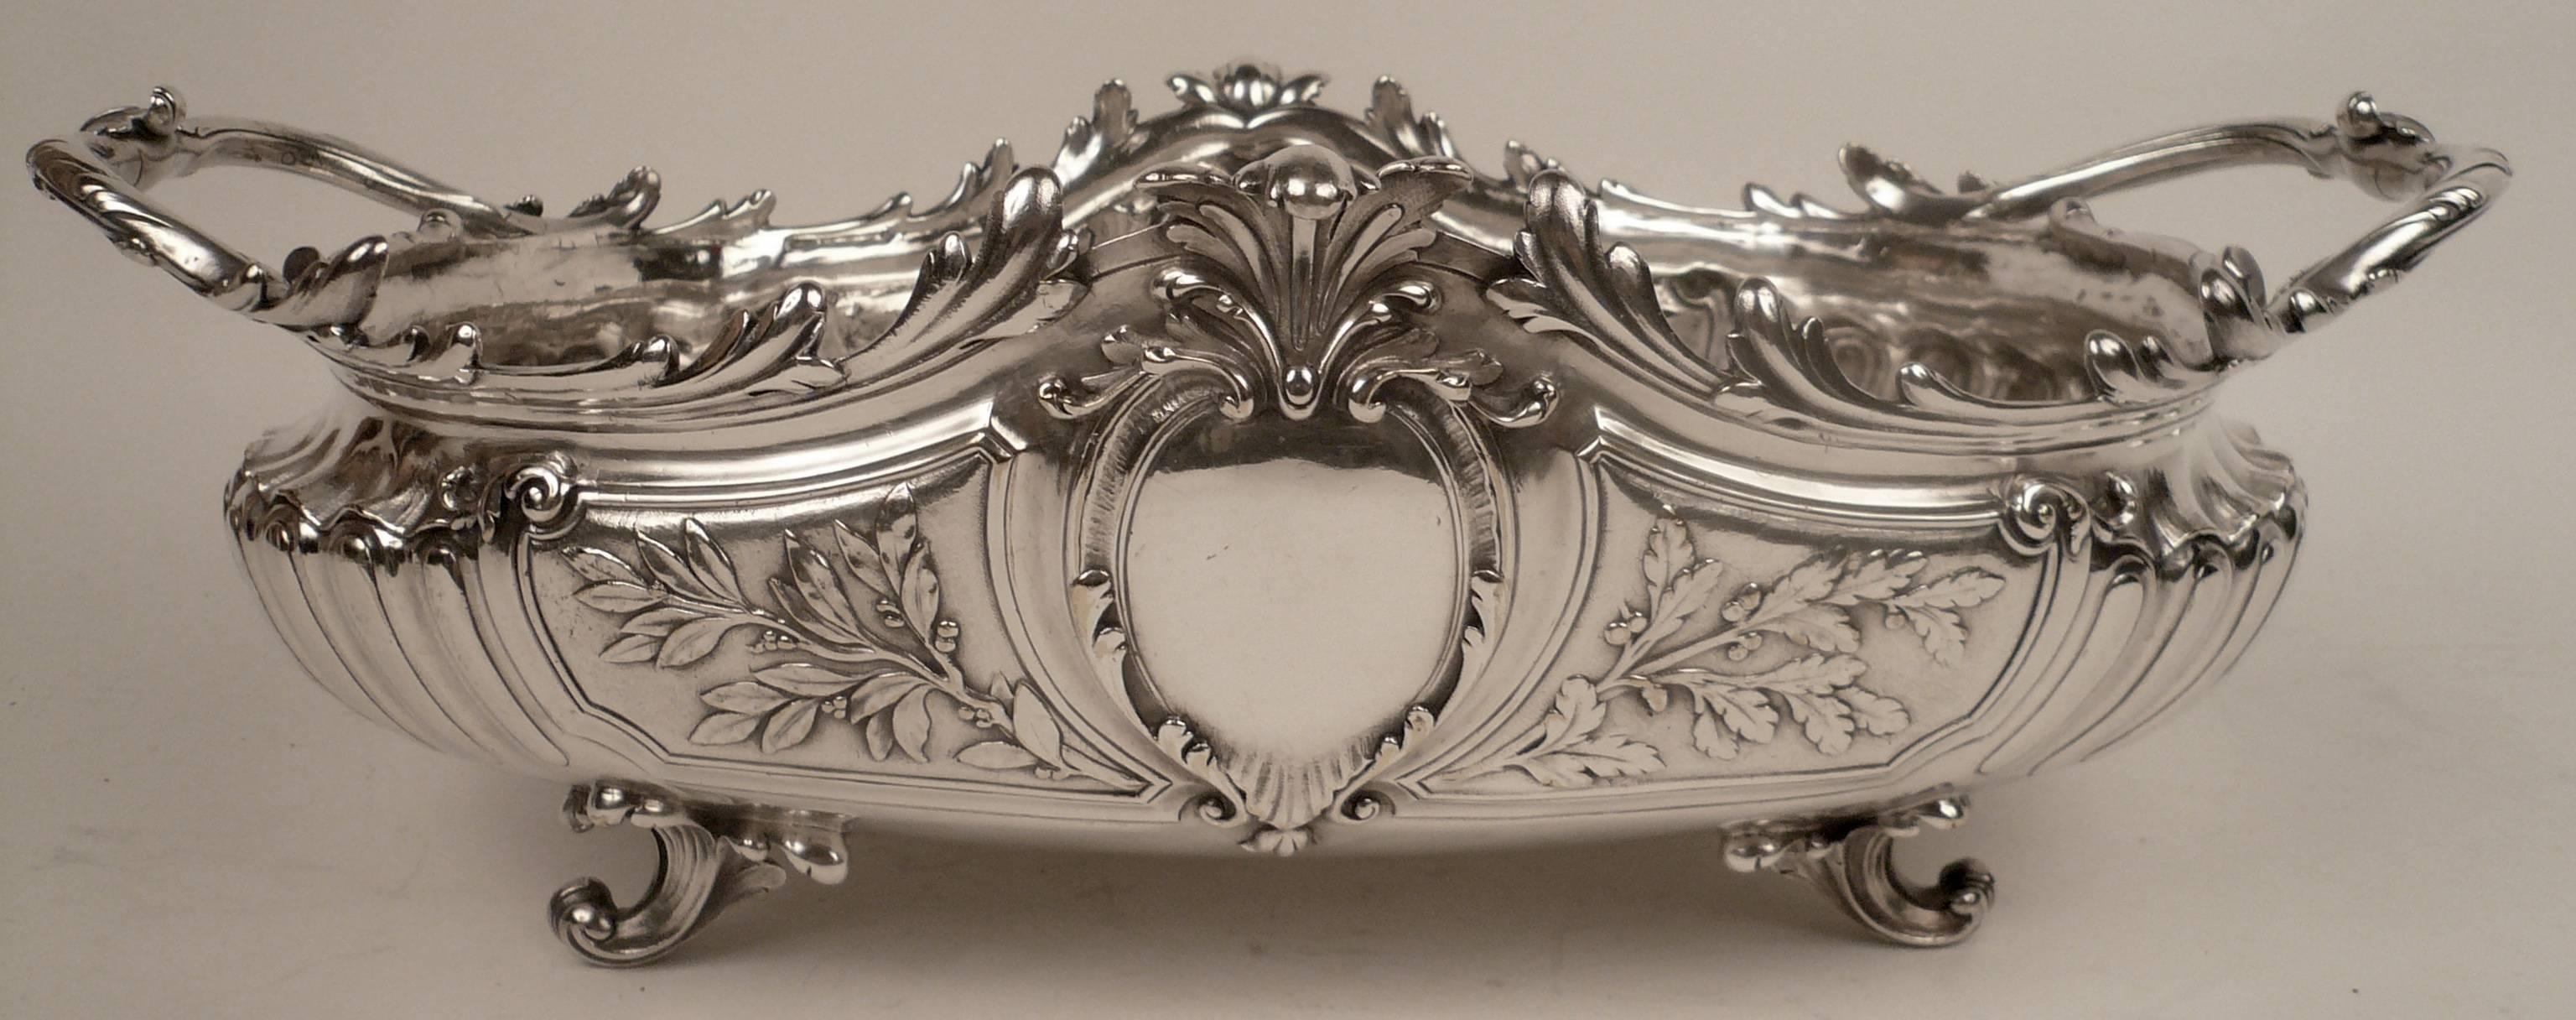 This grand silver plated bronze centerpiece bowl of sculptural form, has beautifully hand chased details.